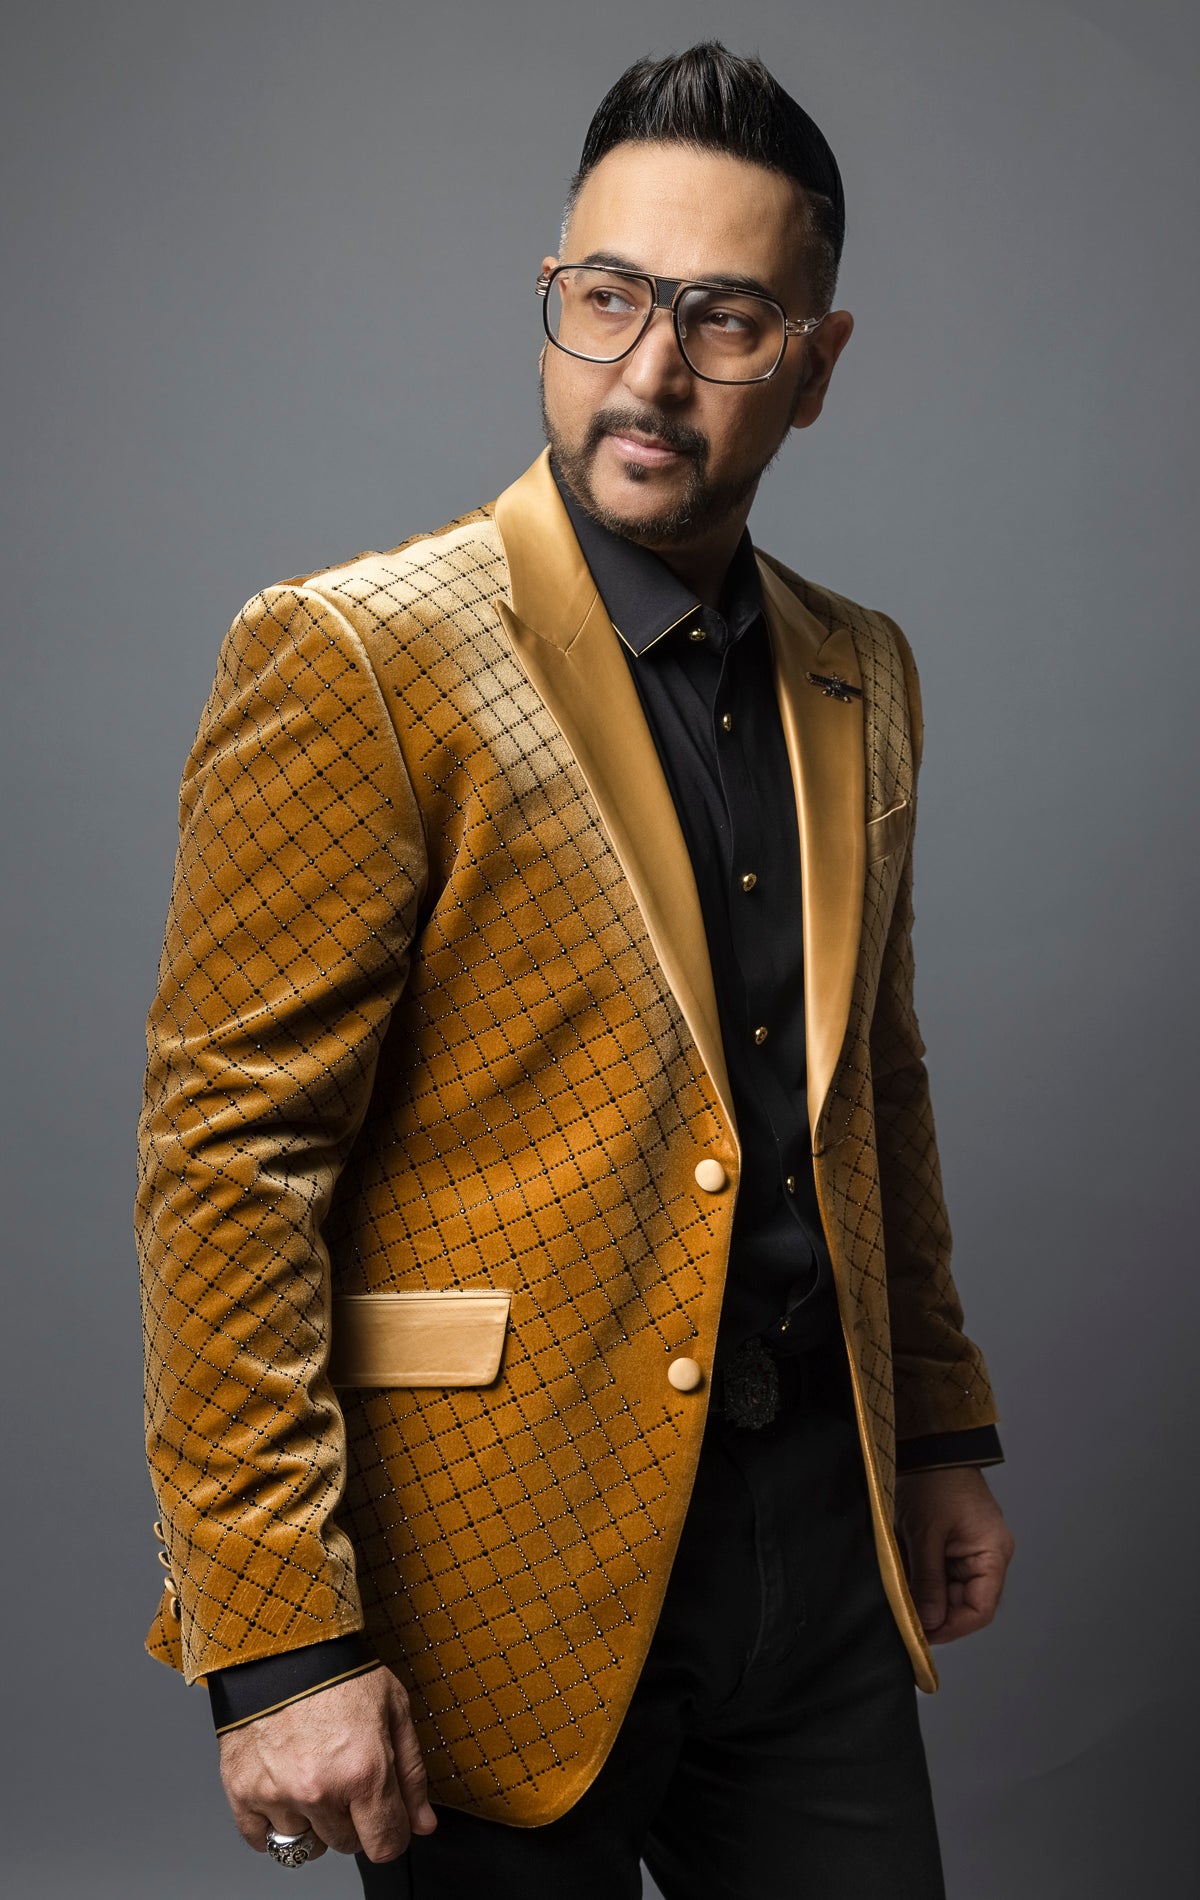 This jacket features a slim fit, with a narrow point-to-point shoulder measurement and higher armholes for a modern silhouette. Its diamond-shaped design and notch lapel add a touch of sophistication. The long sleeves, two-button closure, and four-button cuffs provide a classic look, while the front welt chest and hip pockets offer practicality. Additionally, there is an interior pocket for extra storage.